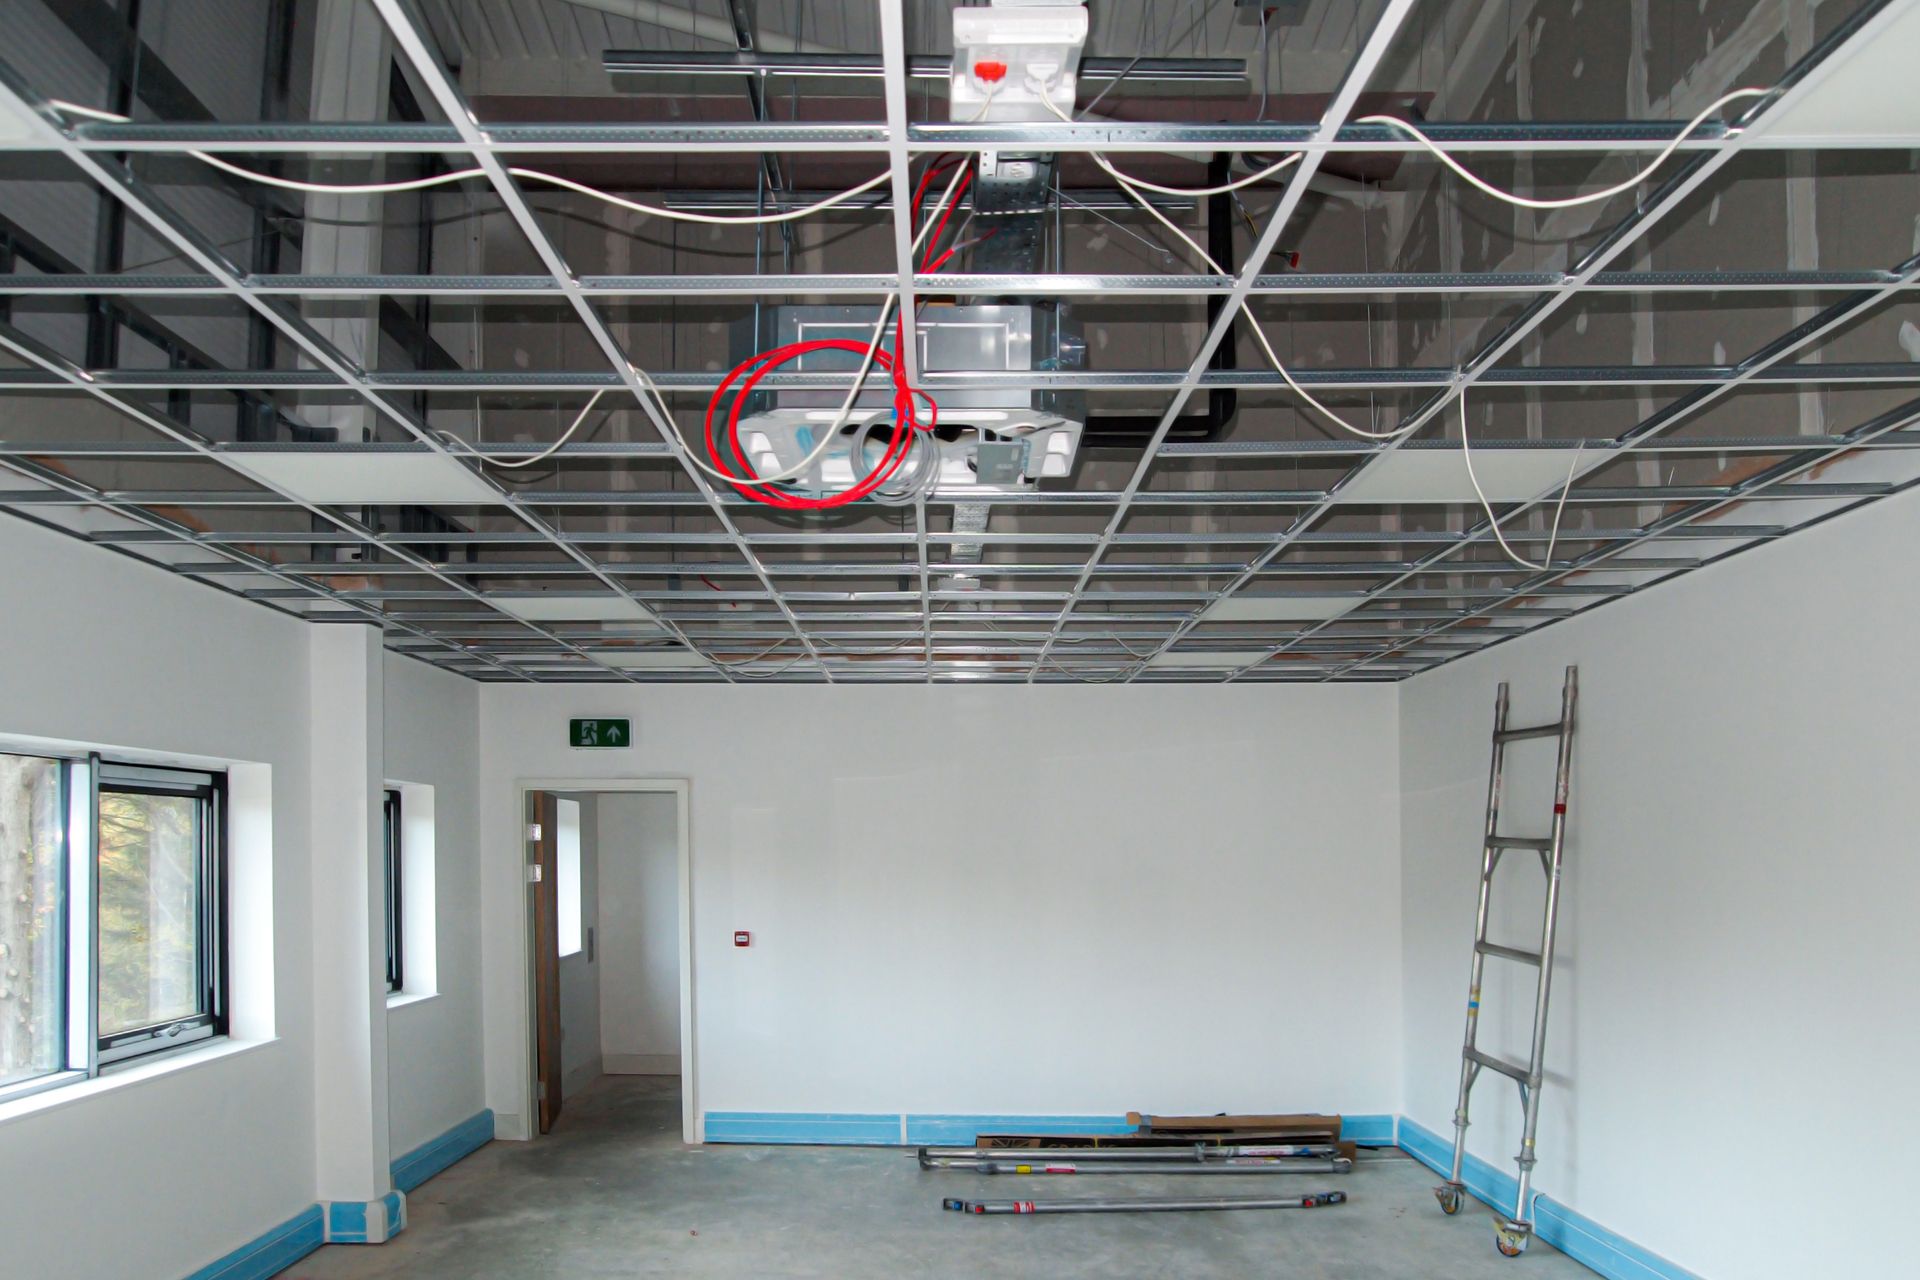 Electrical Wiring in Commercial Building